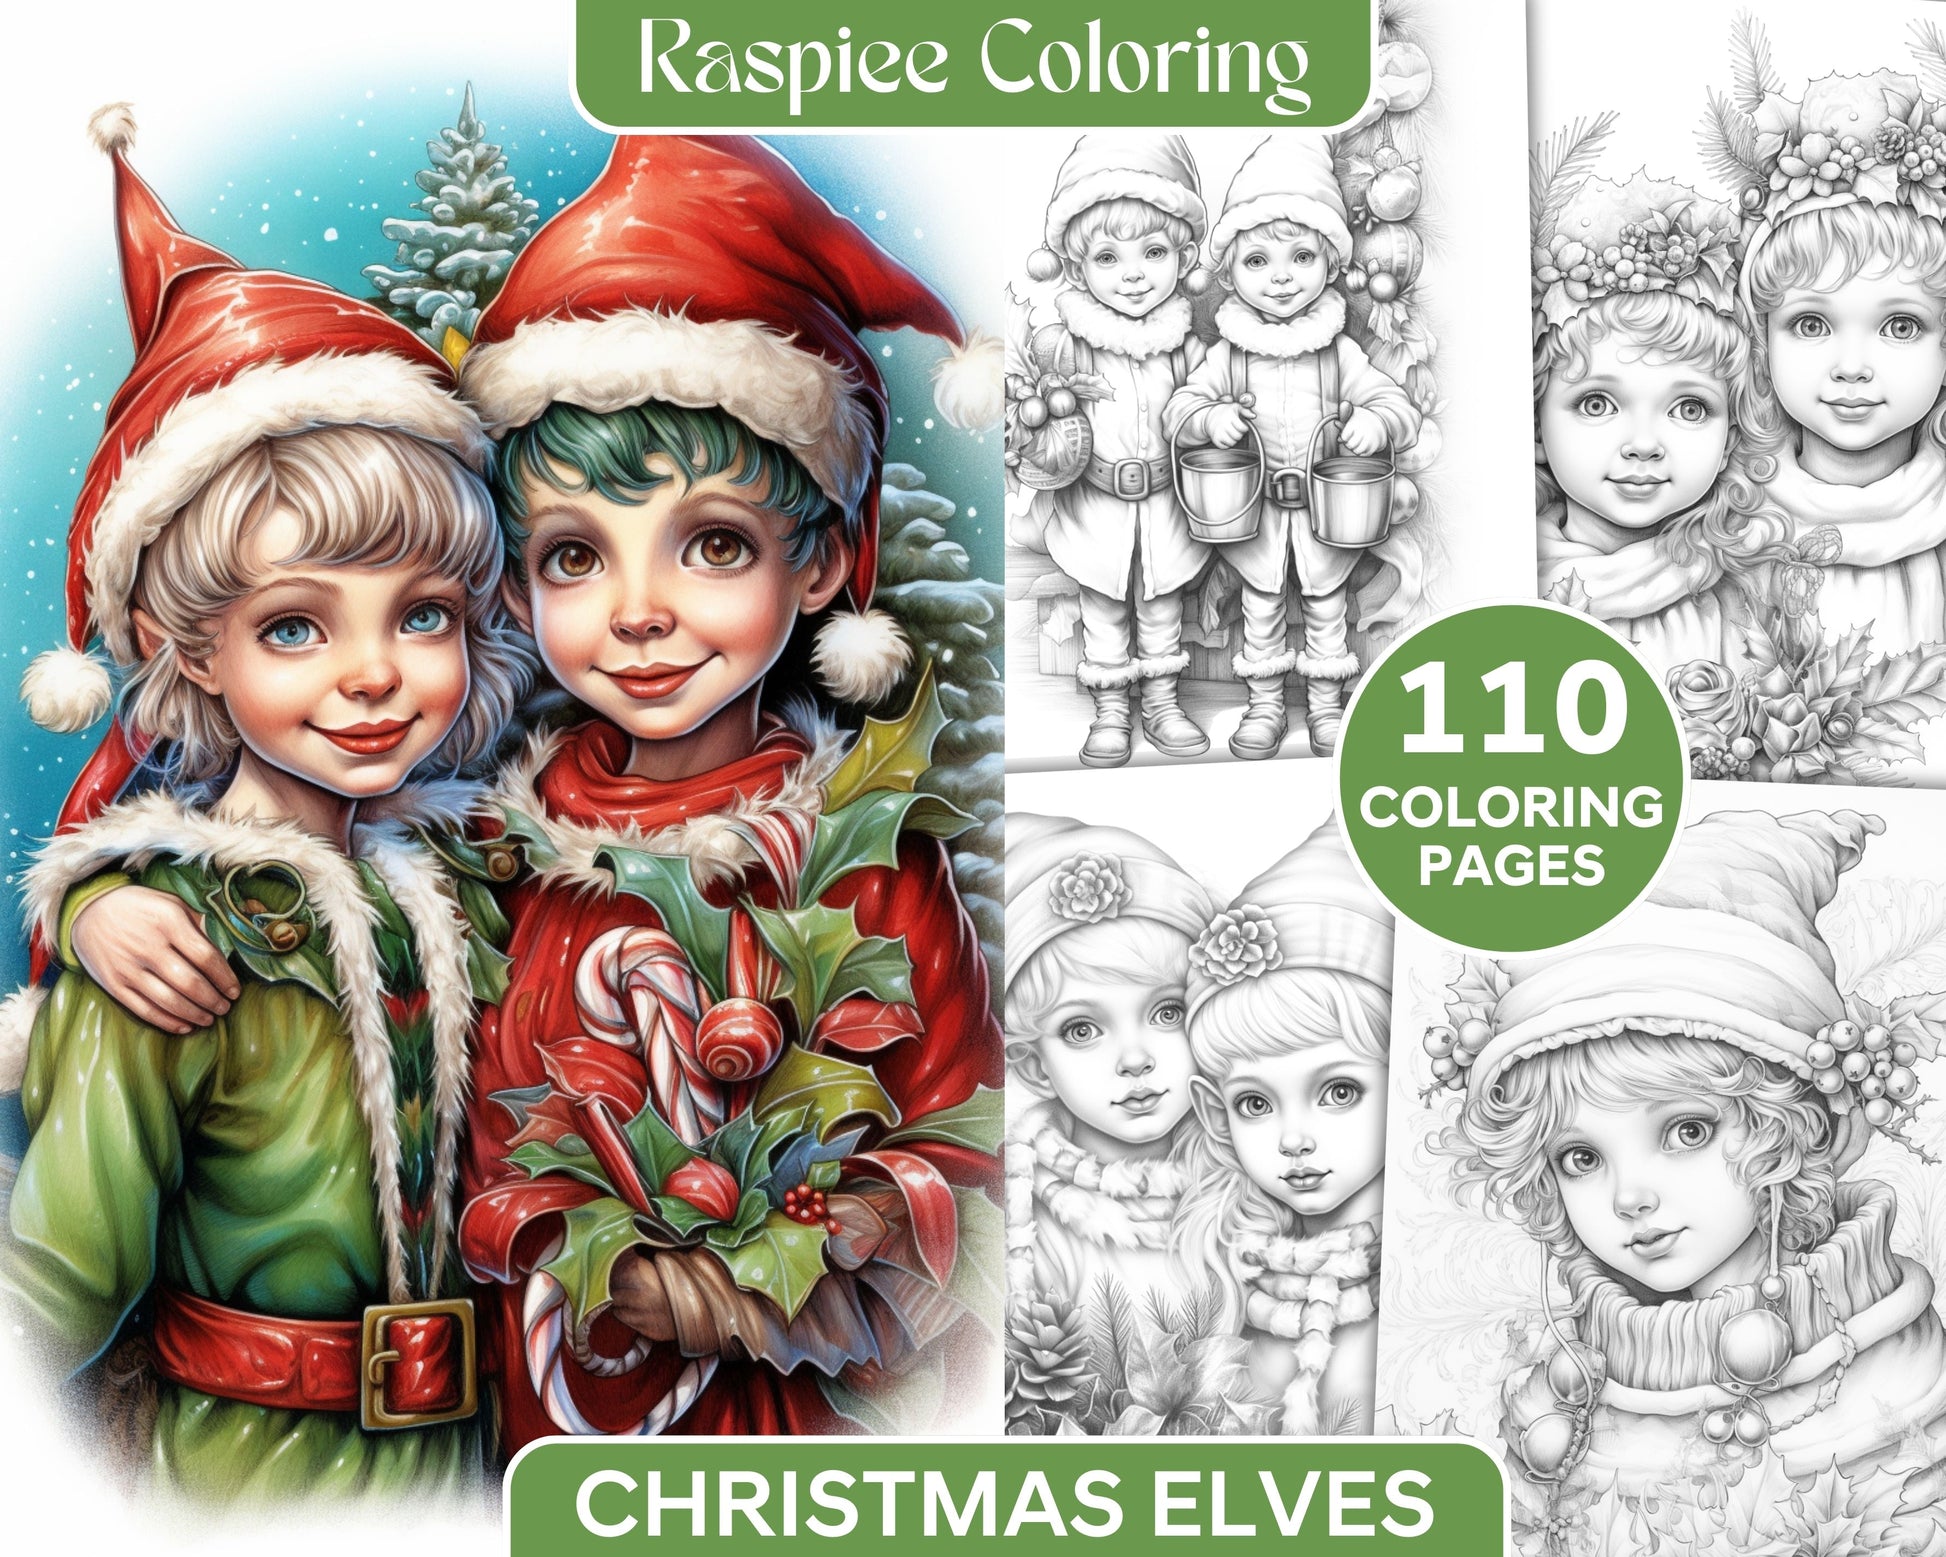 Christmas elves grayscale coloring pages printable for adults kids â coloring